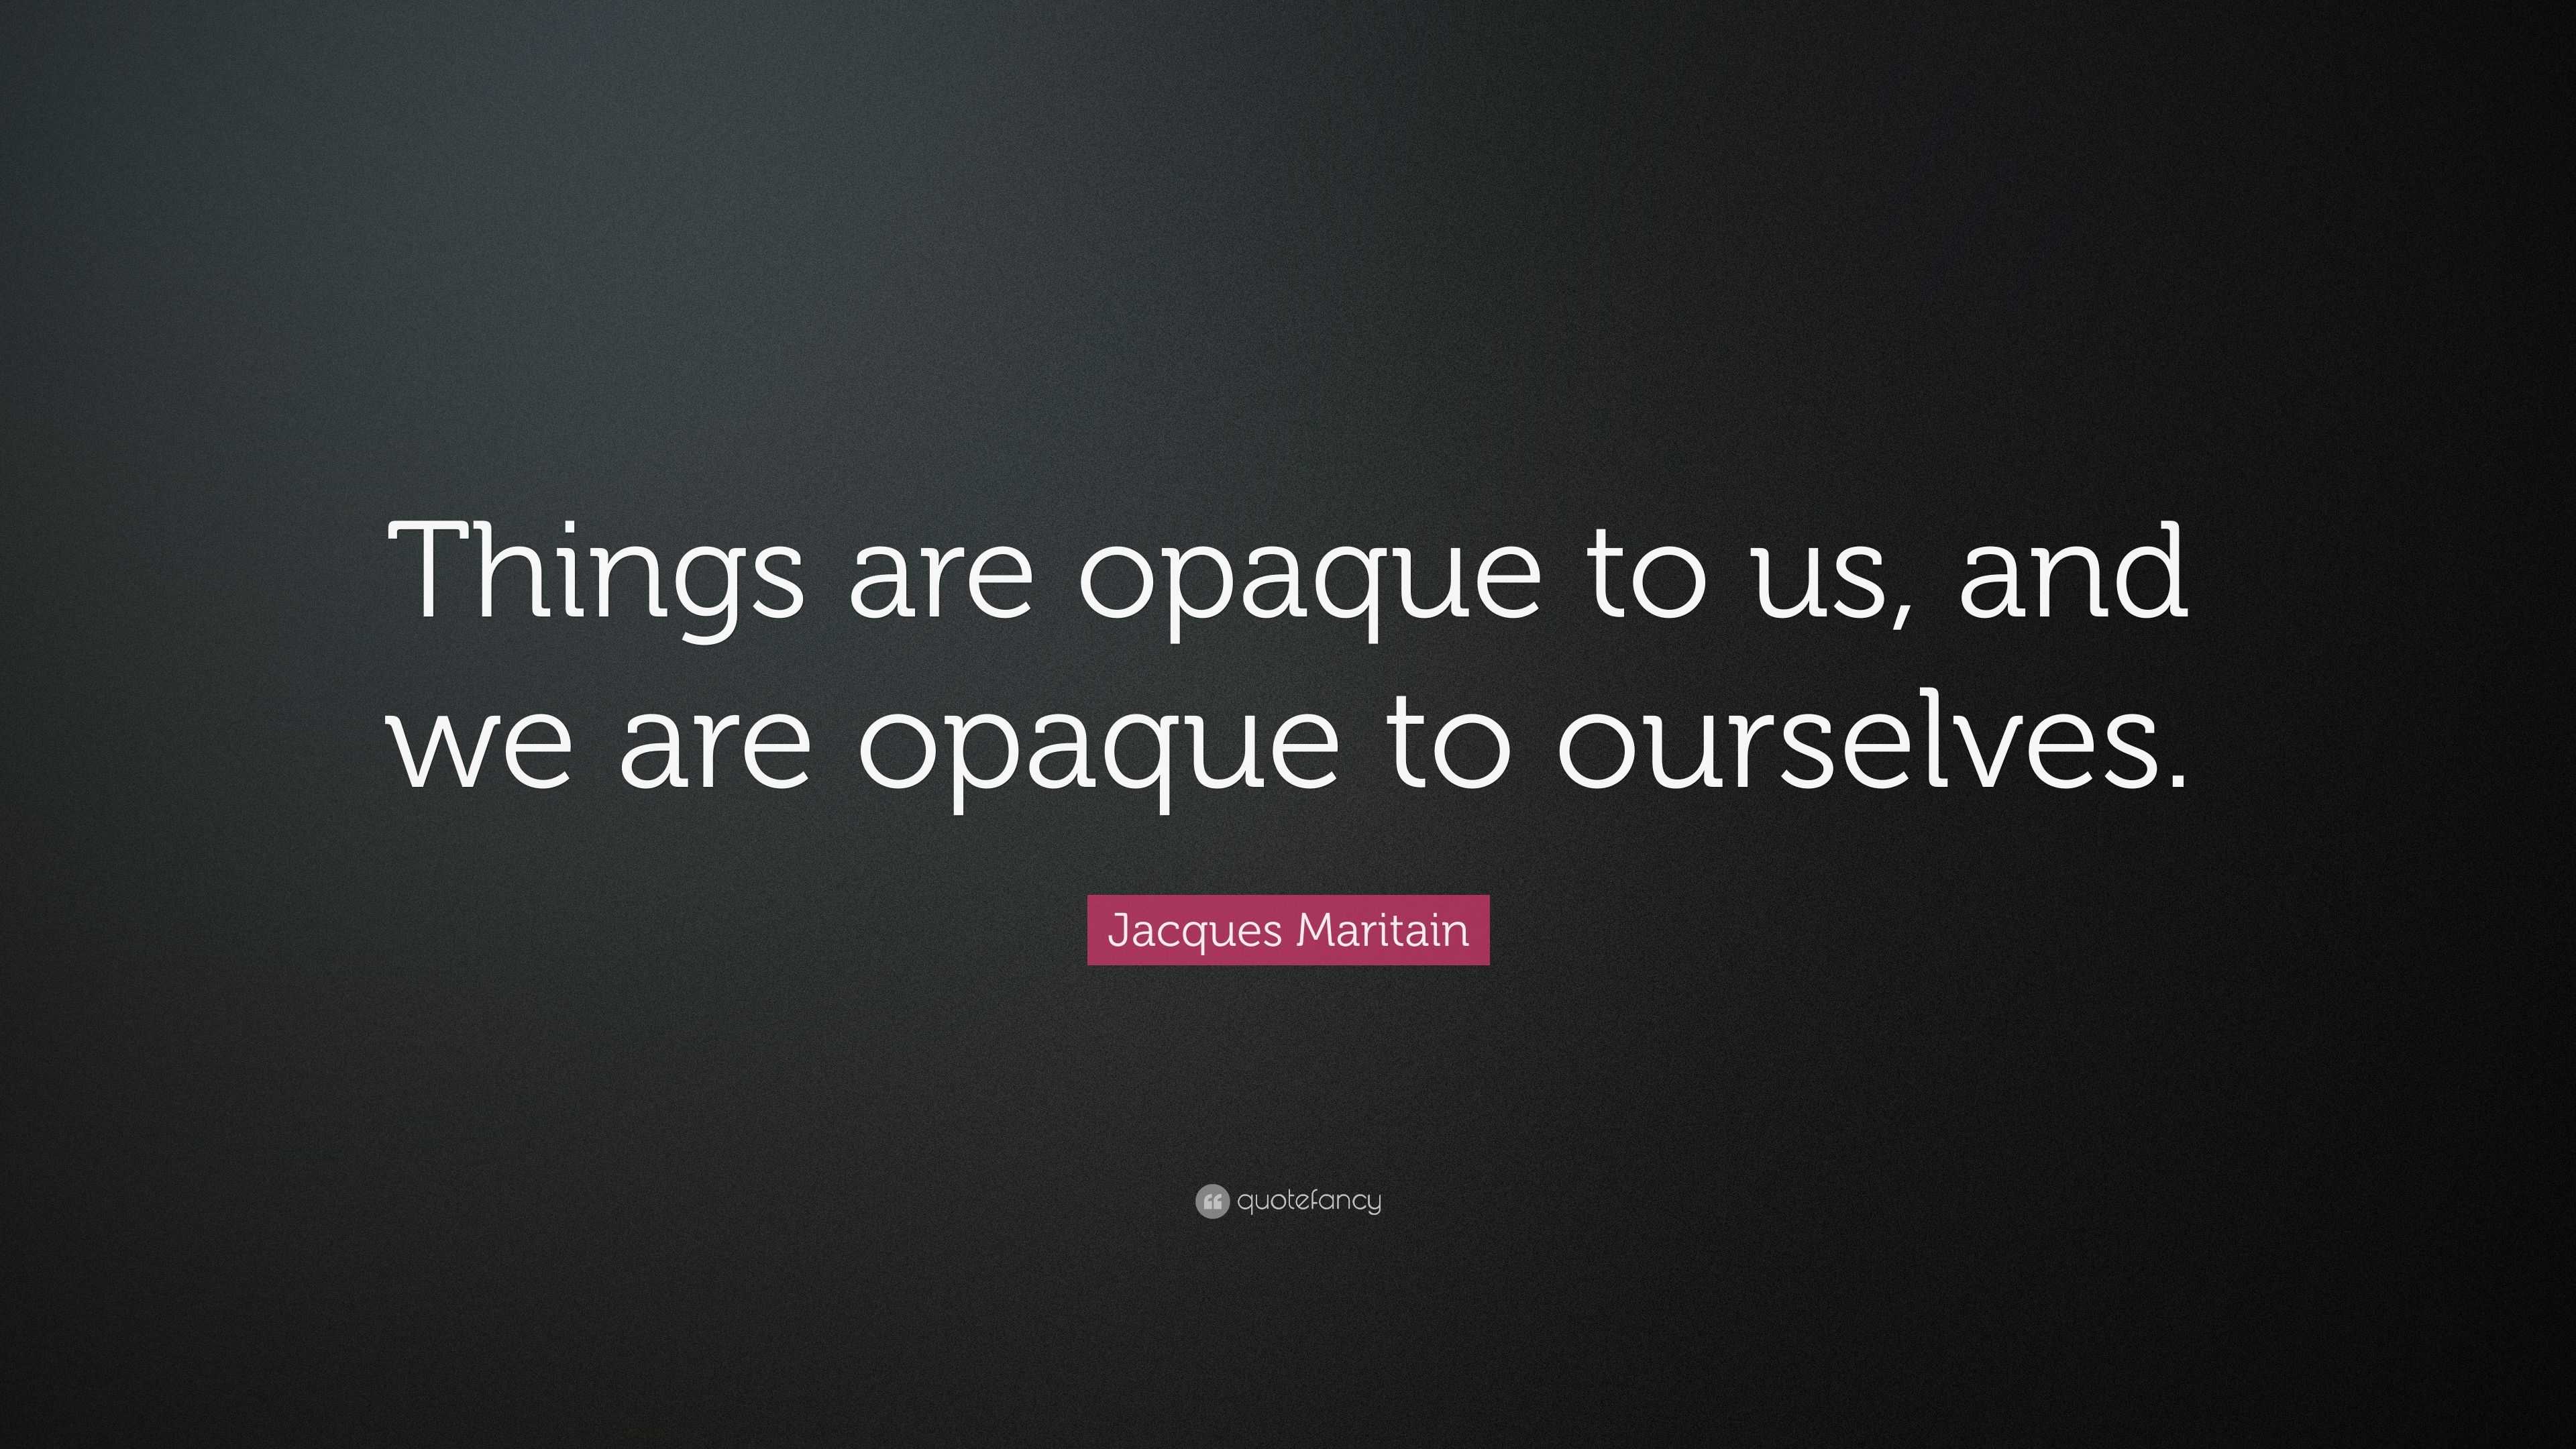 Jacques Maritain Quote: “Things are